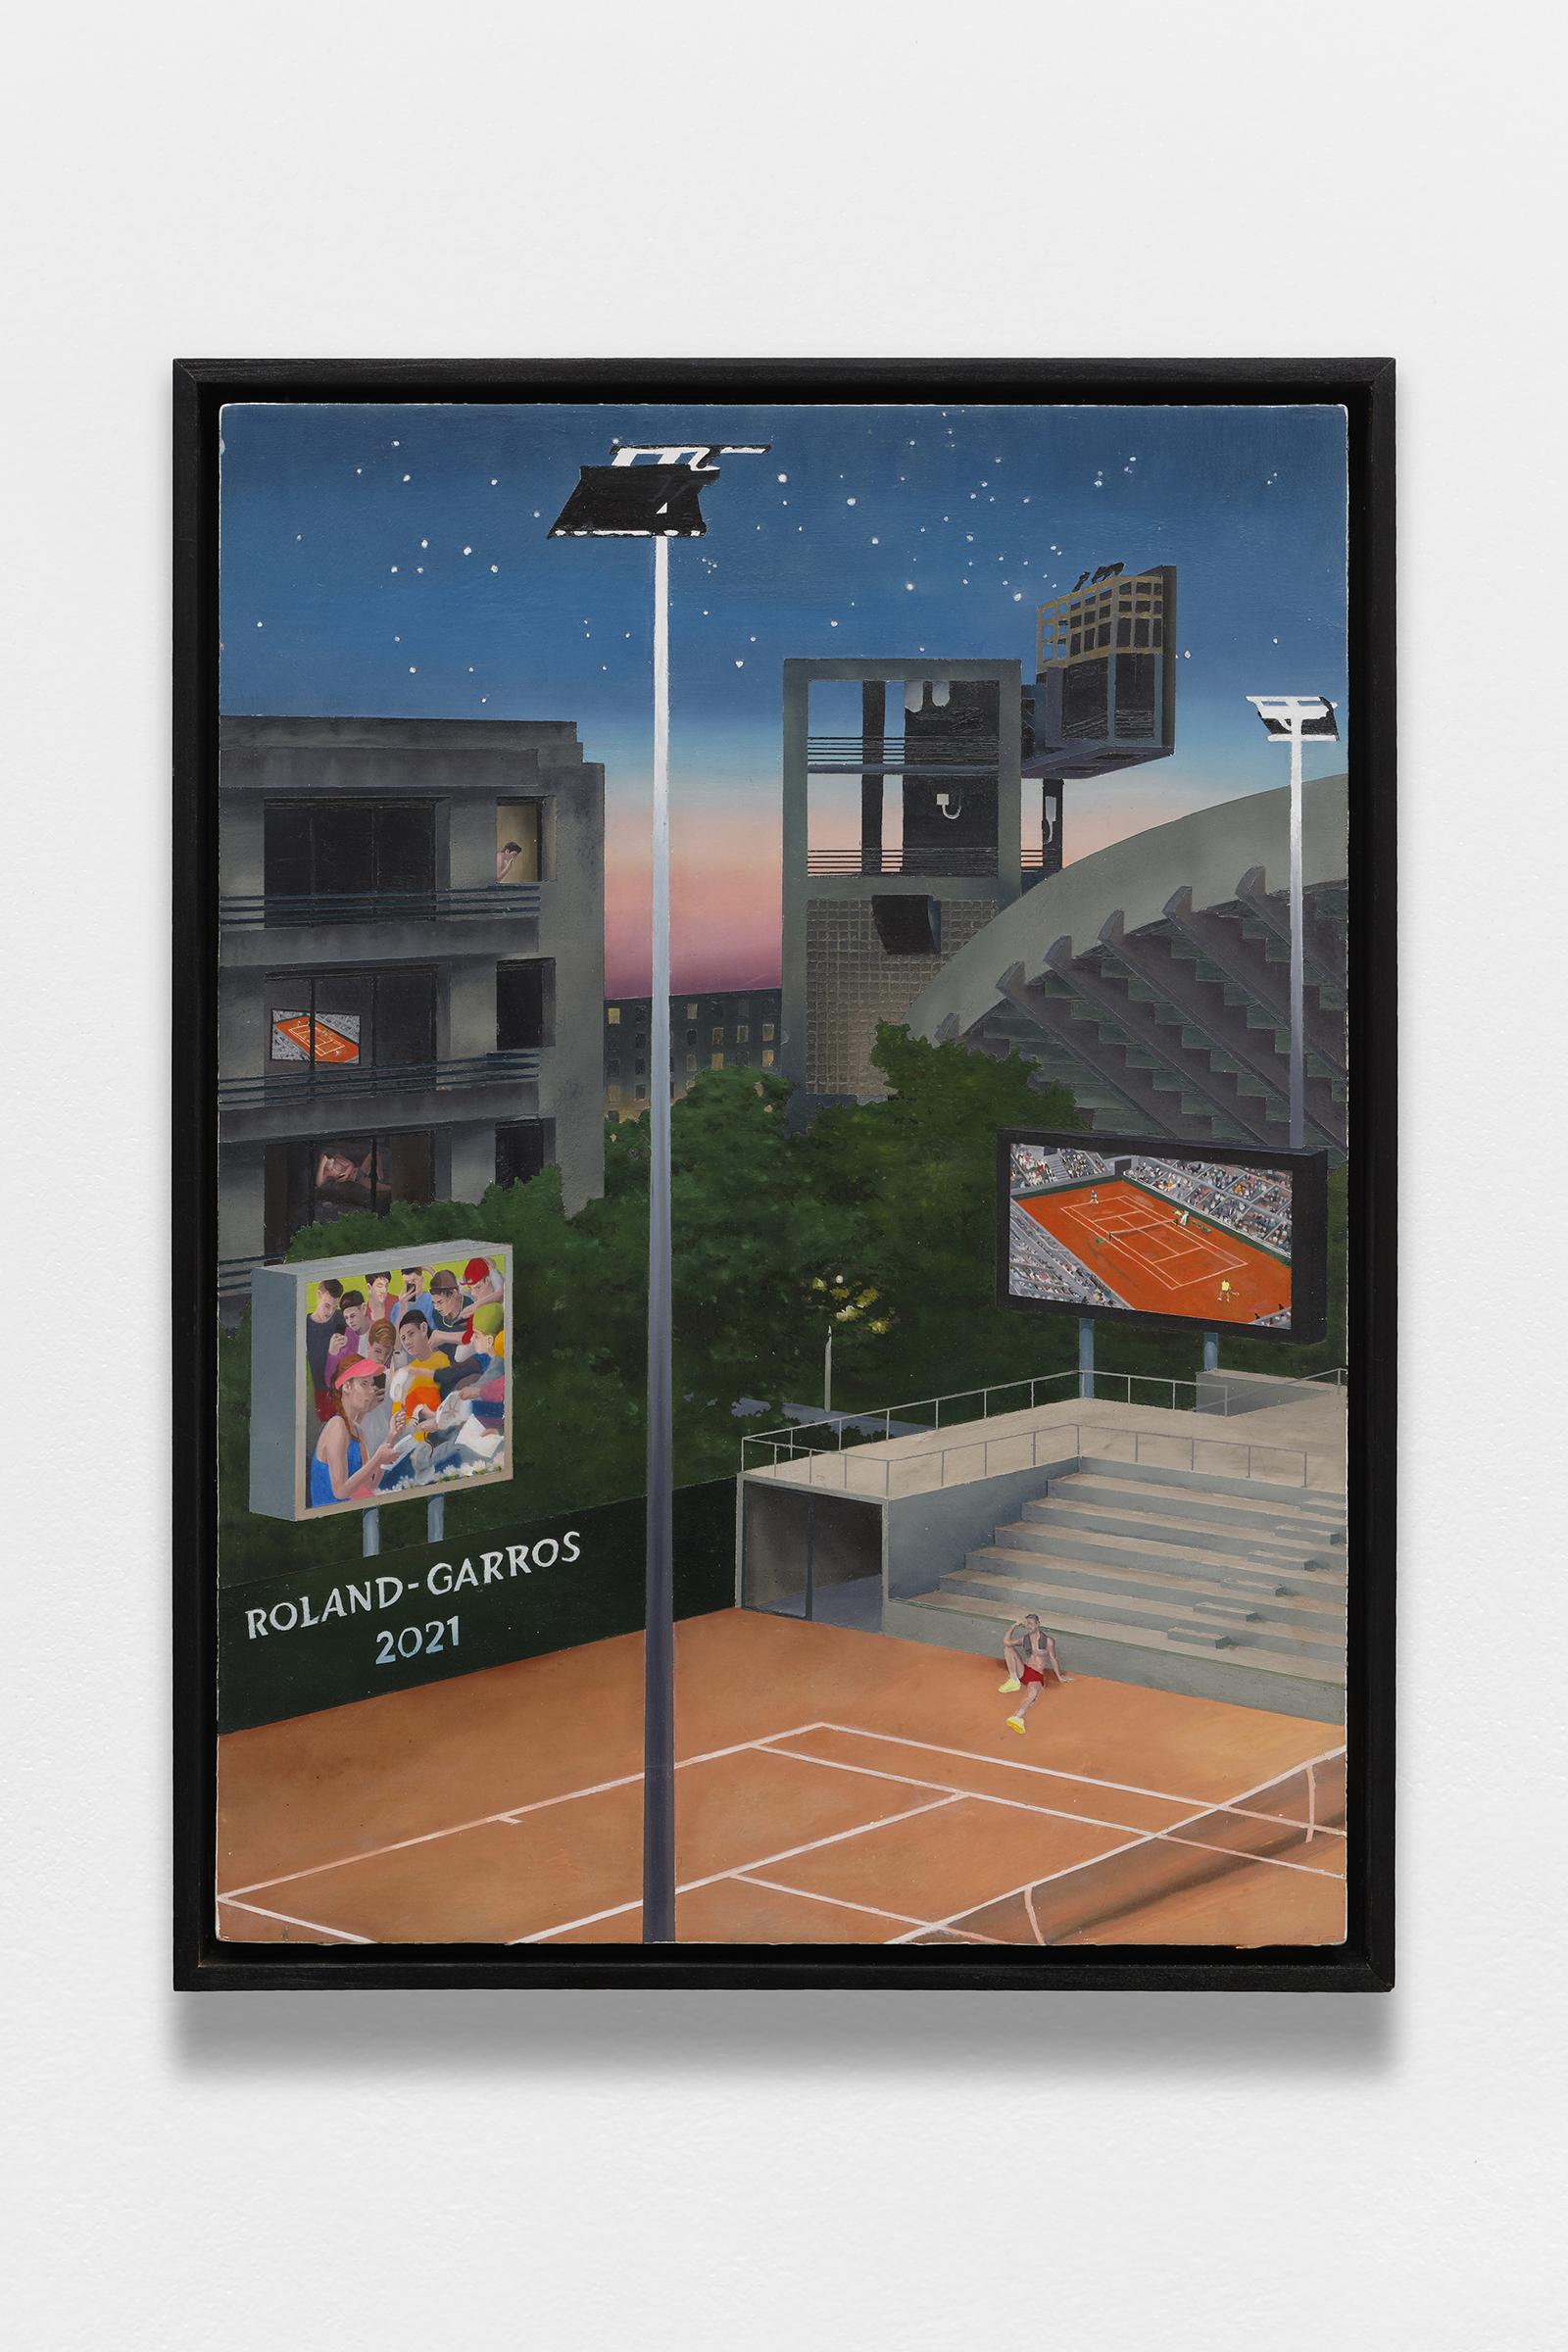 About the Artwork  Jean Claracq, Roland Garros, 2021, Oil on Wood, 30 X 22 Cm Painting Made for the 2021 Edition of Roland Garros  by Jean Claracq